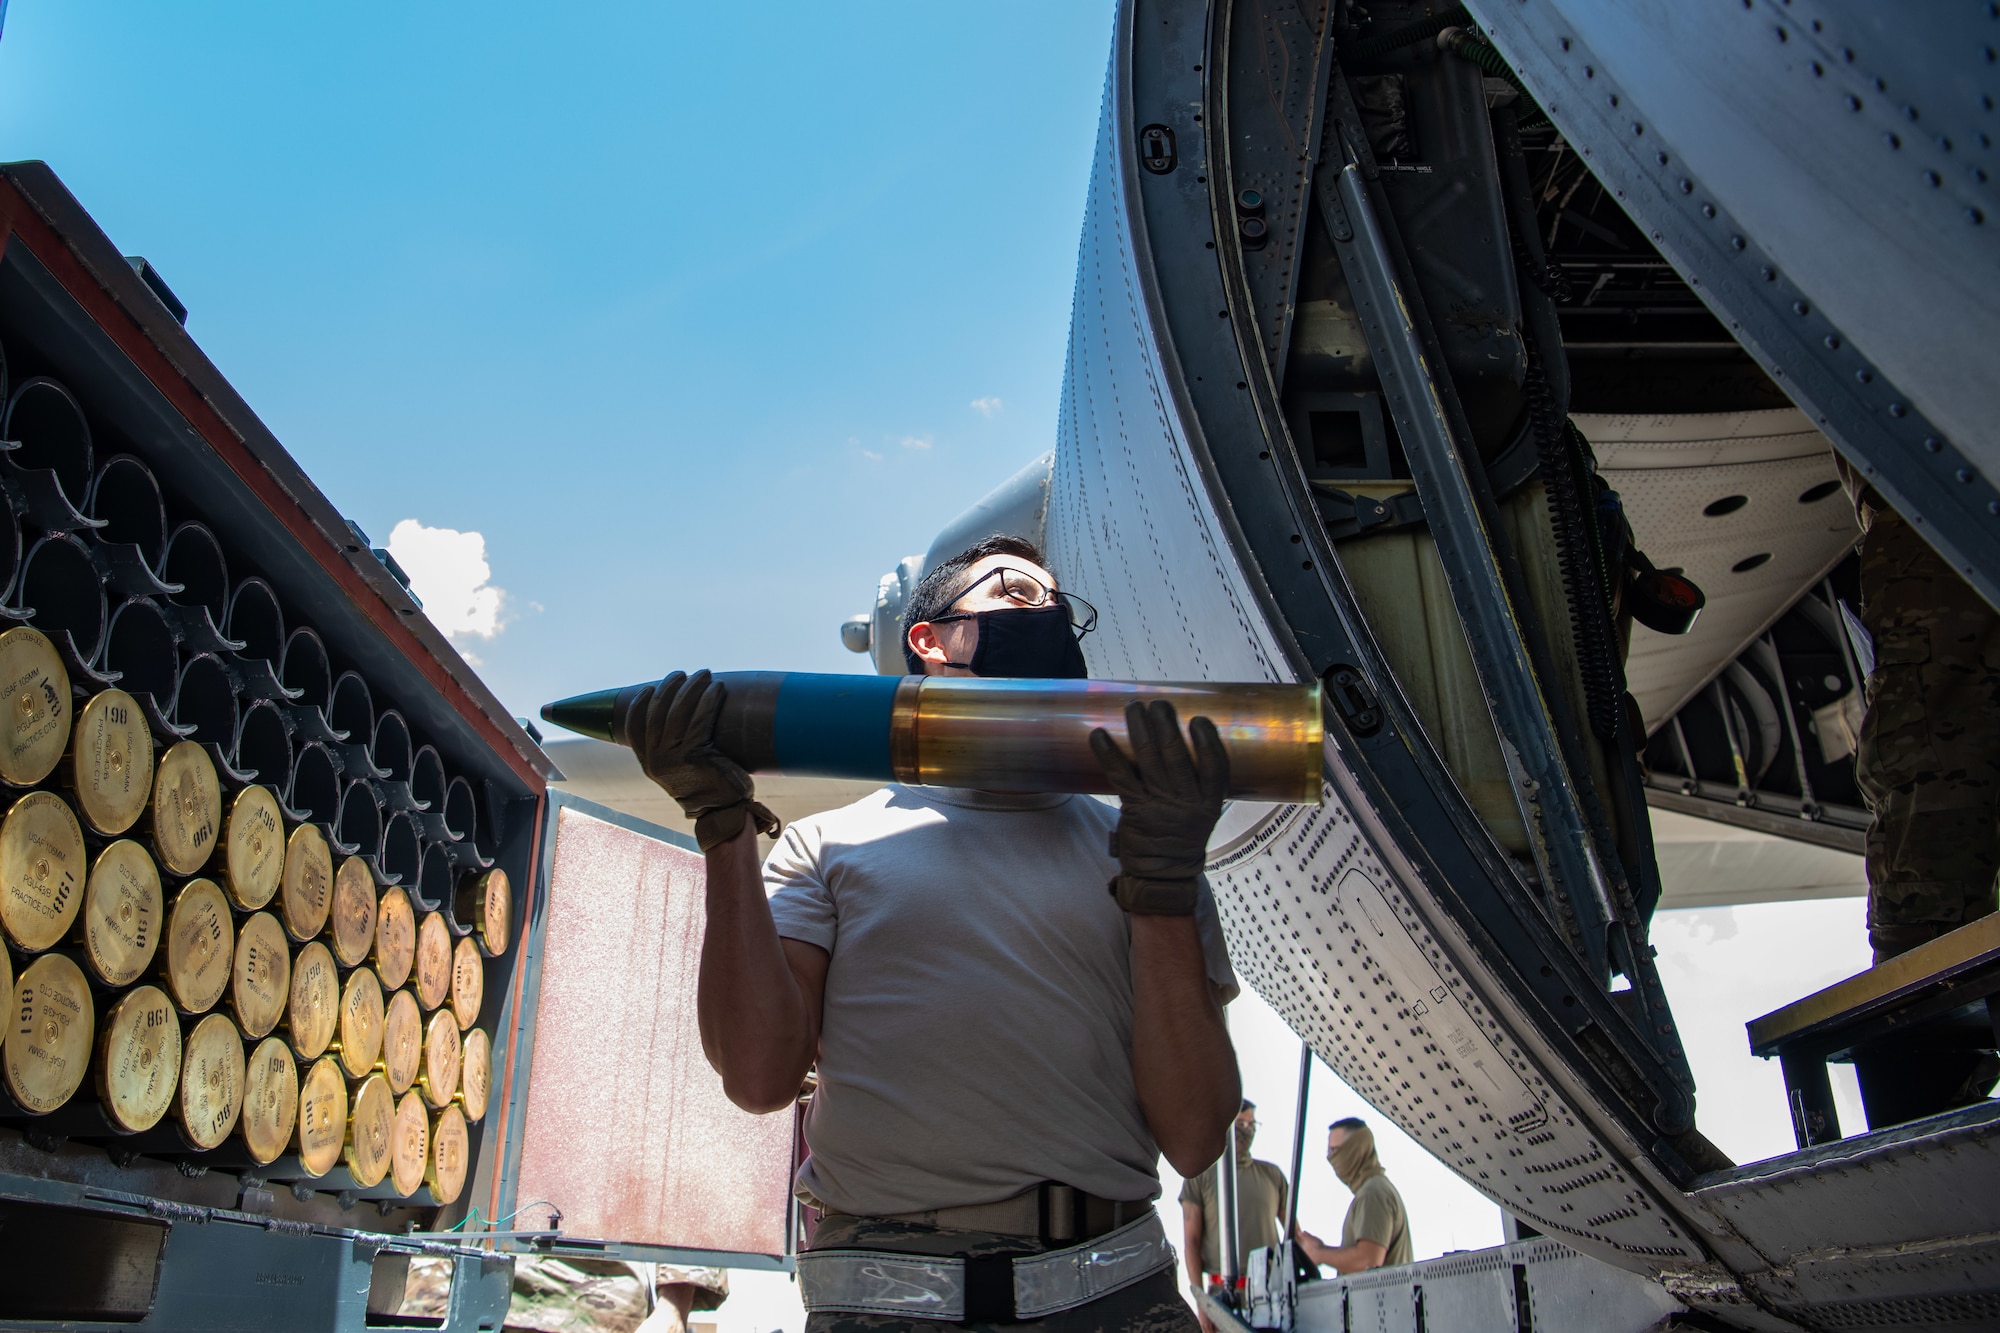 An Airman loads a plane with munitions